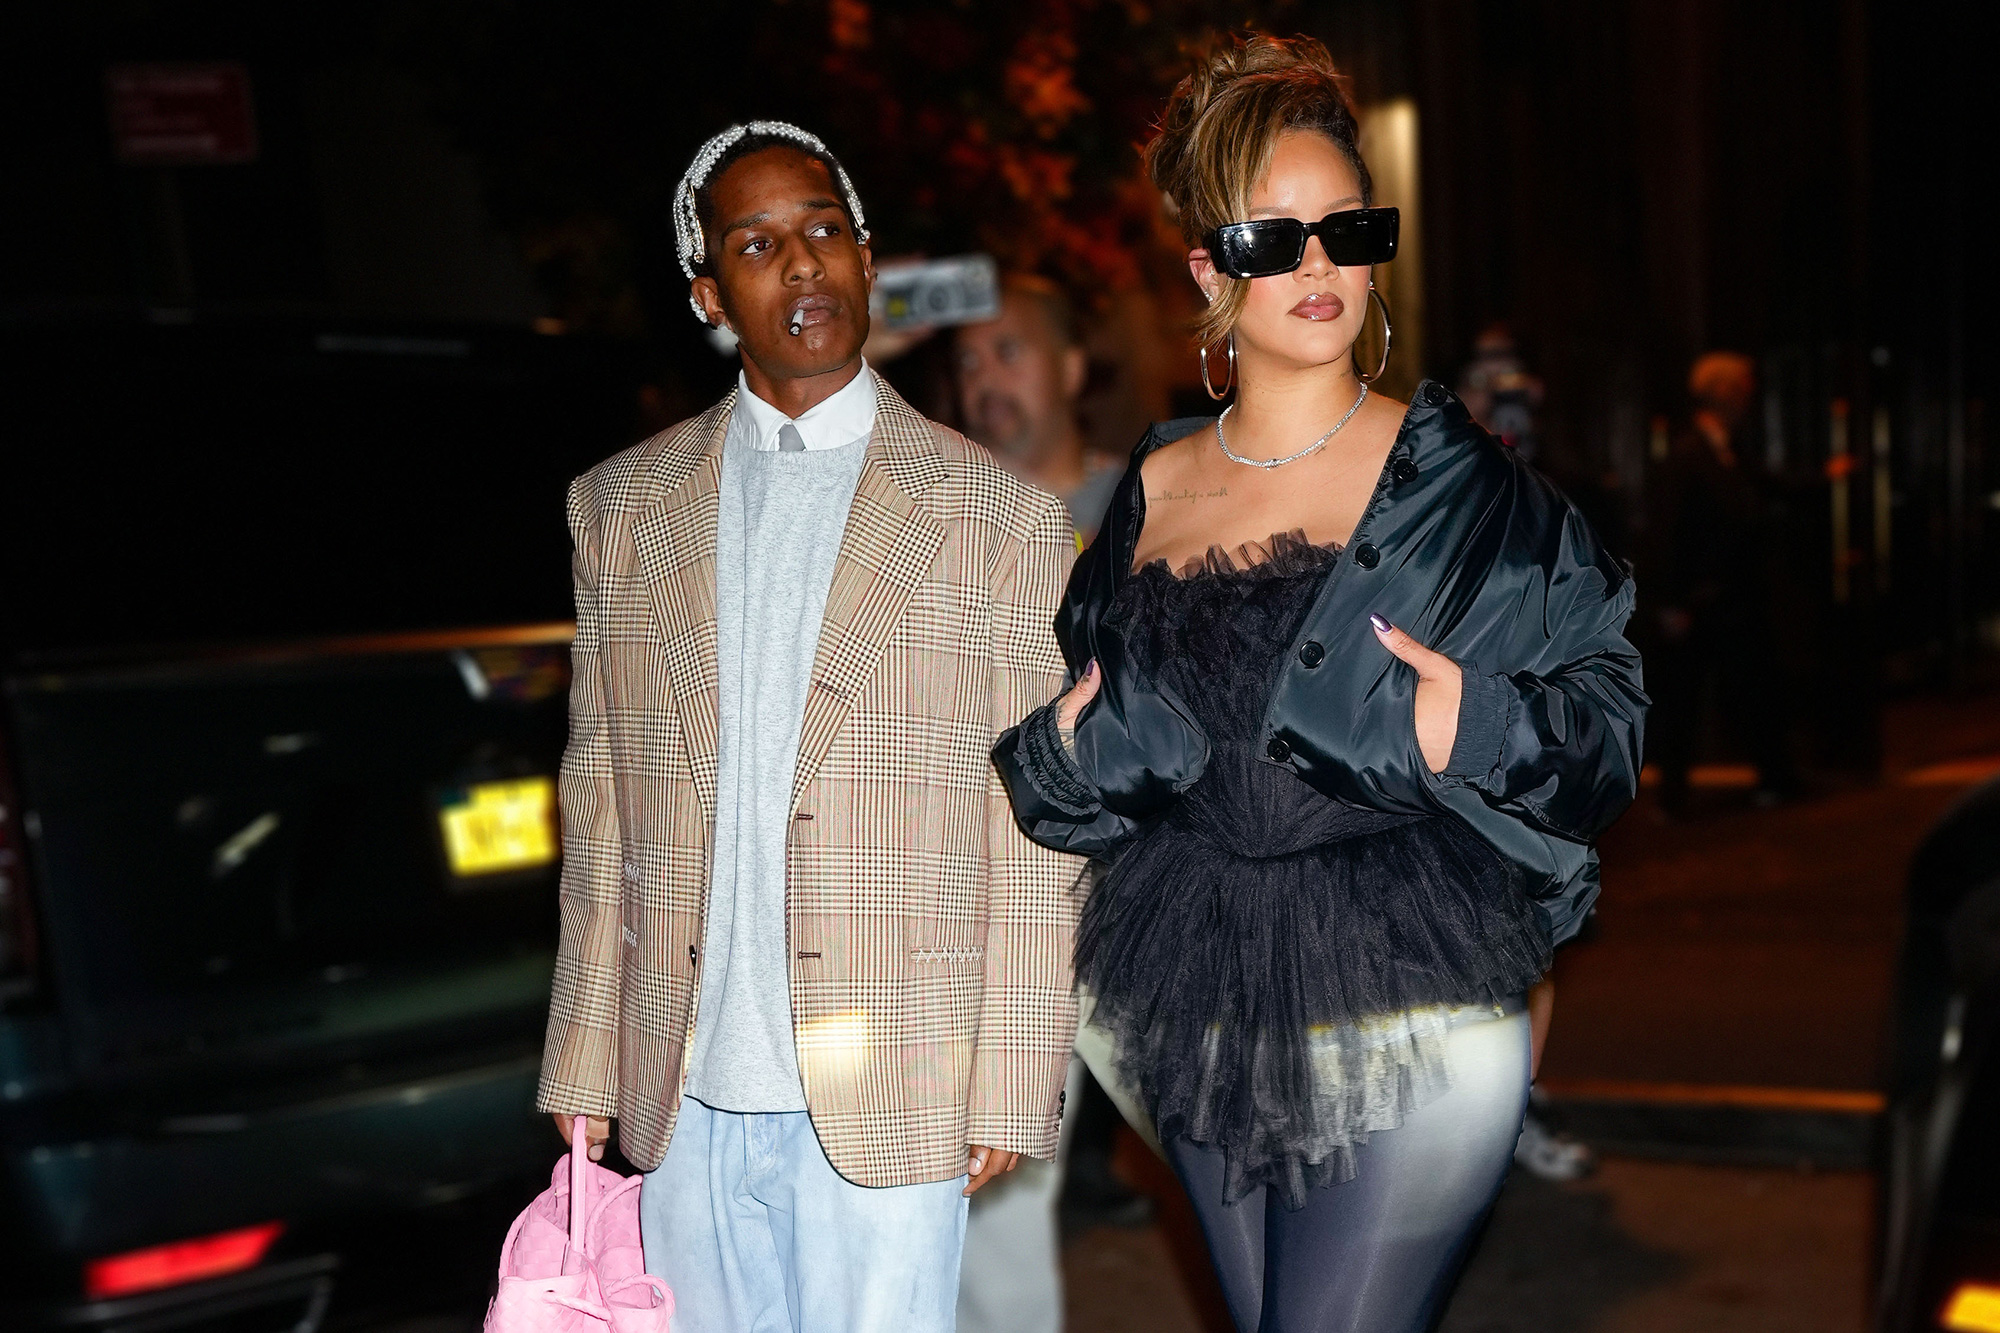 ASAP Rocky and Rihanna are seen at Carbone to celebrate ASAP Rocky's birthday on October 04, 2023 in New York City.